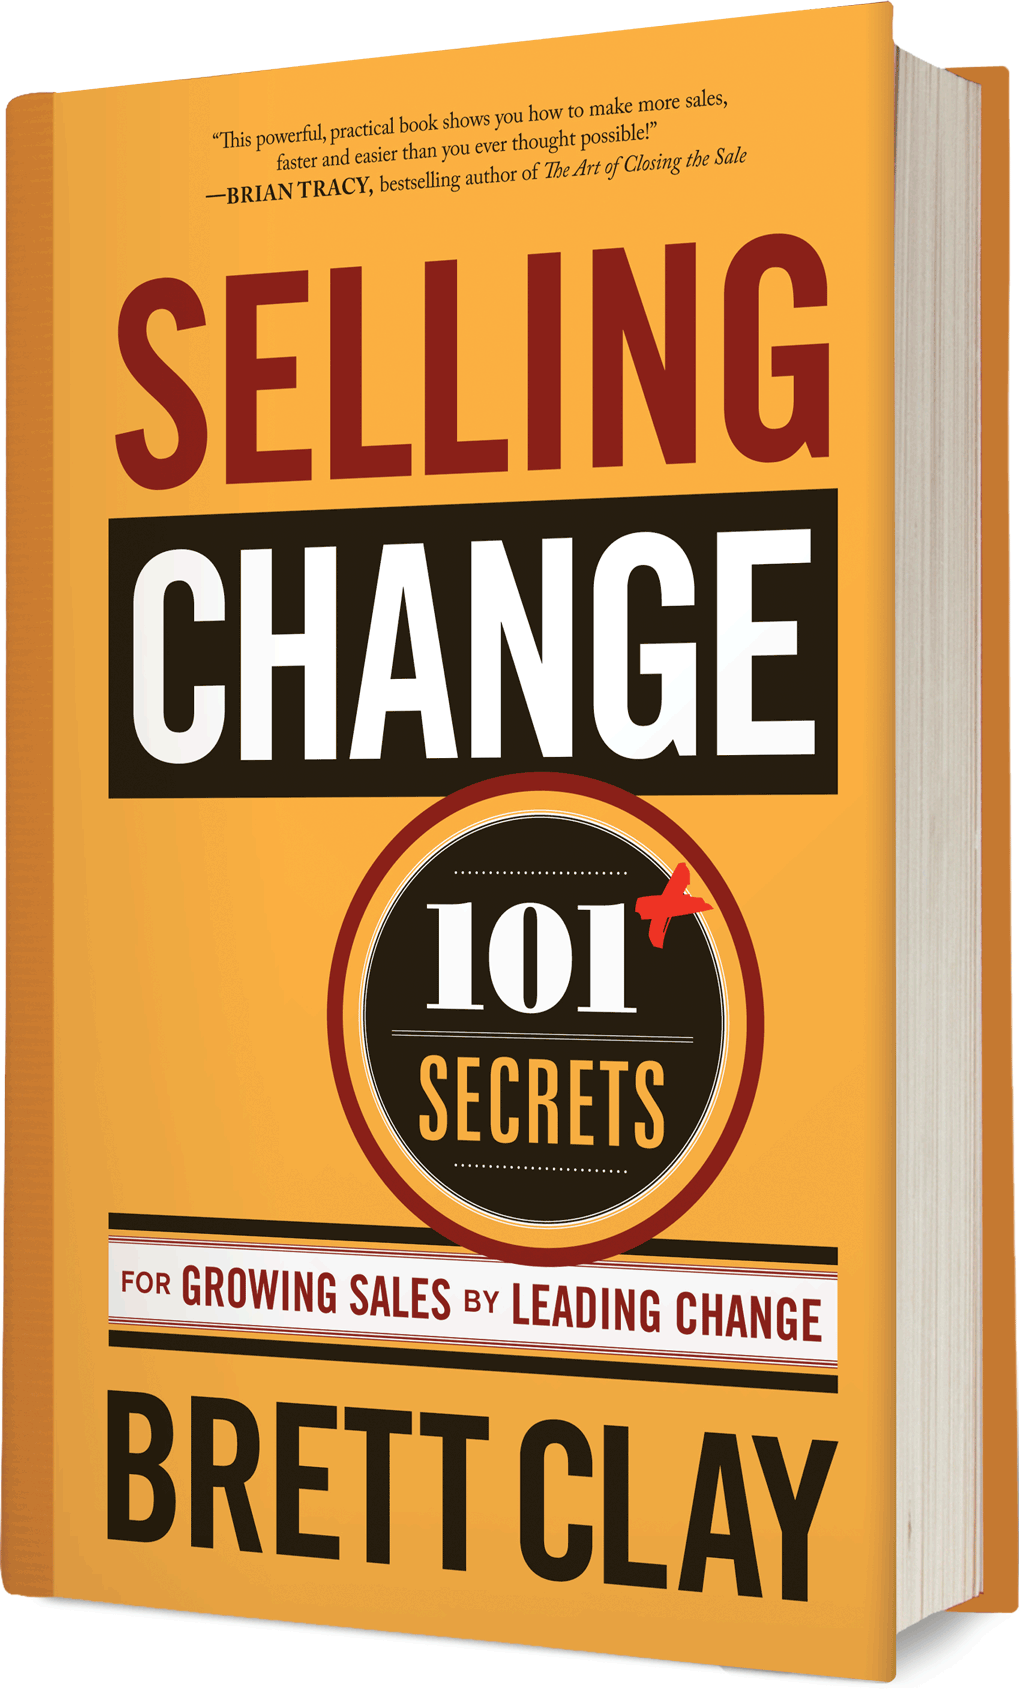 Best selling books. 4 Sales book. Selling changes. Best book about selling. The sales book.